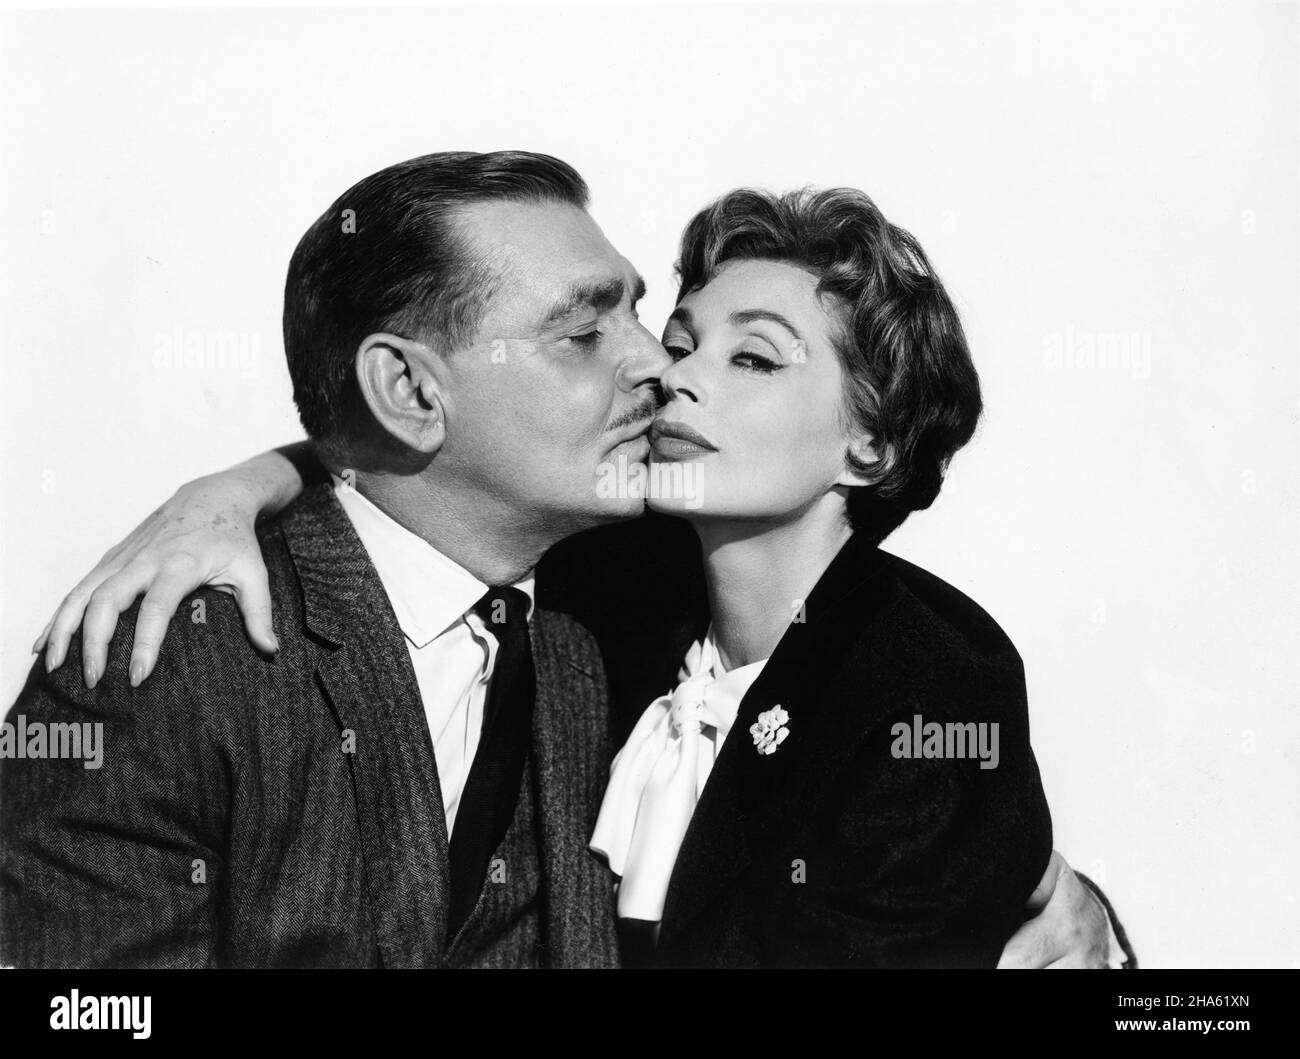 CLARK GABLE and LILLI PALMER Publicity Portrait in BUT NOT FOR ME 1959 director WALTER LANG from the play Accent On Youth by Samson Raphaelson screenplay John Michael Hayes costume design Edith Head Perlberg - Seaton Productions / Paramount Pictures Stock Photo